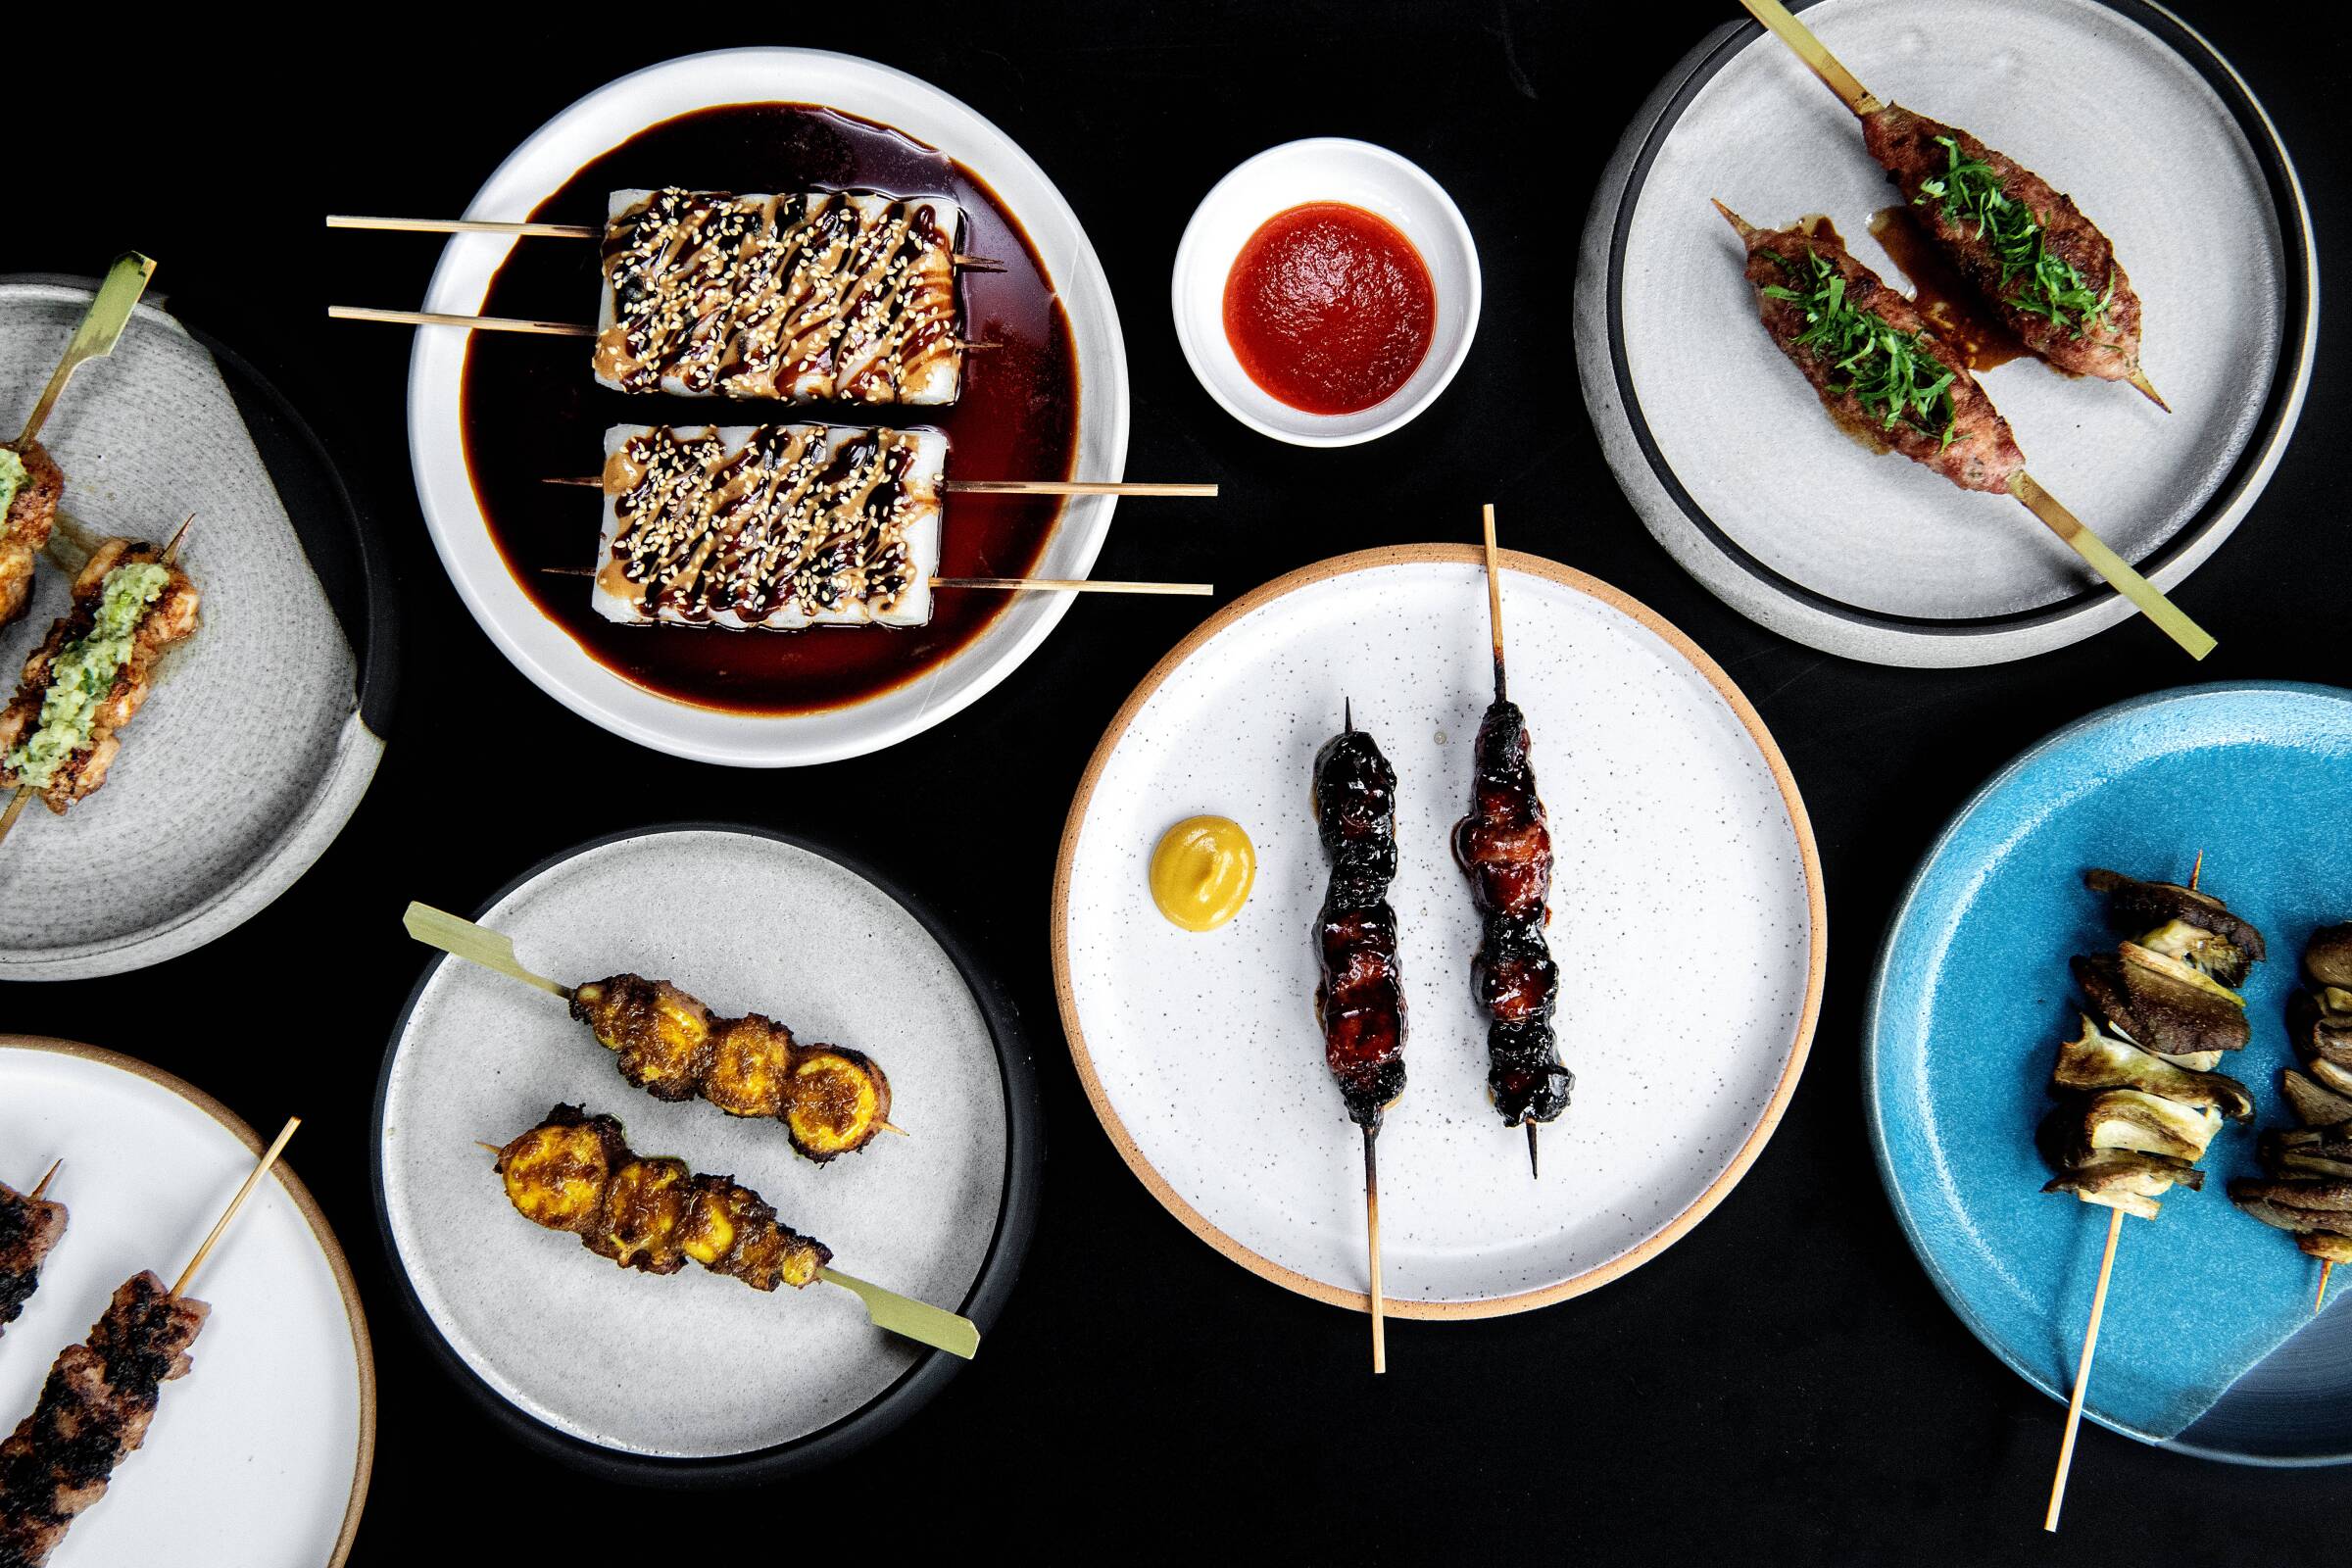 An array of skewers on plates